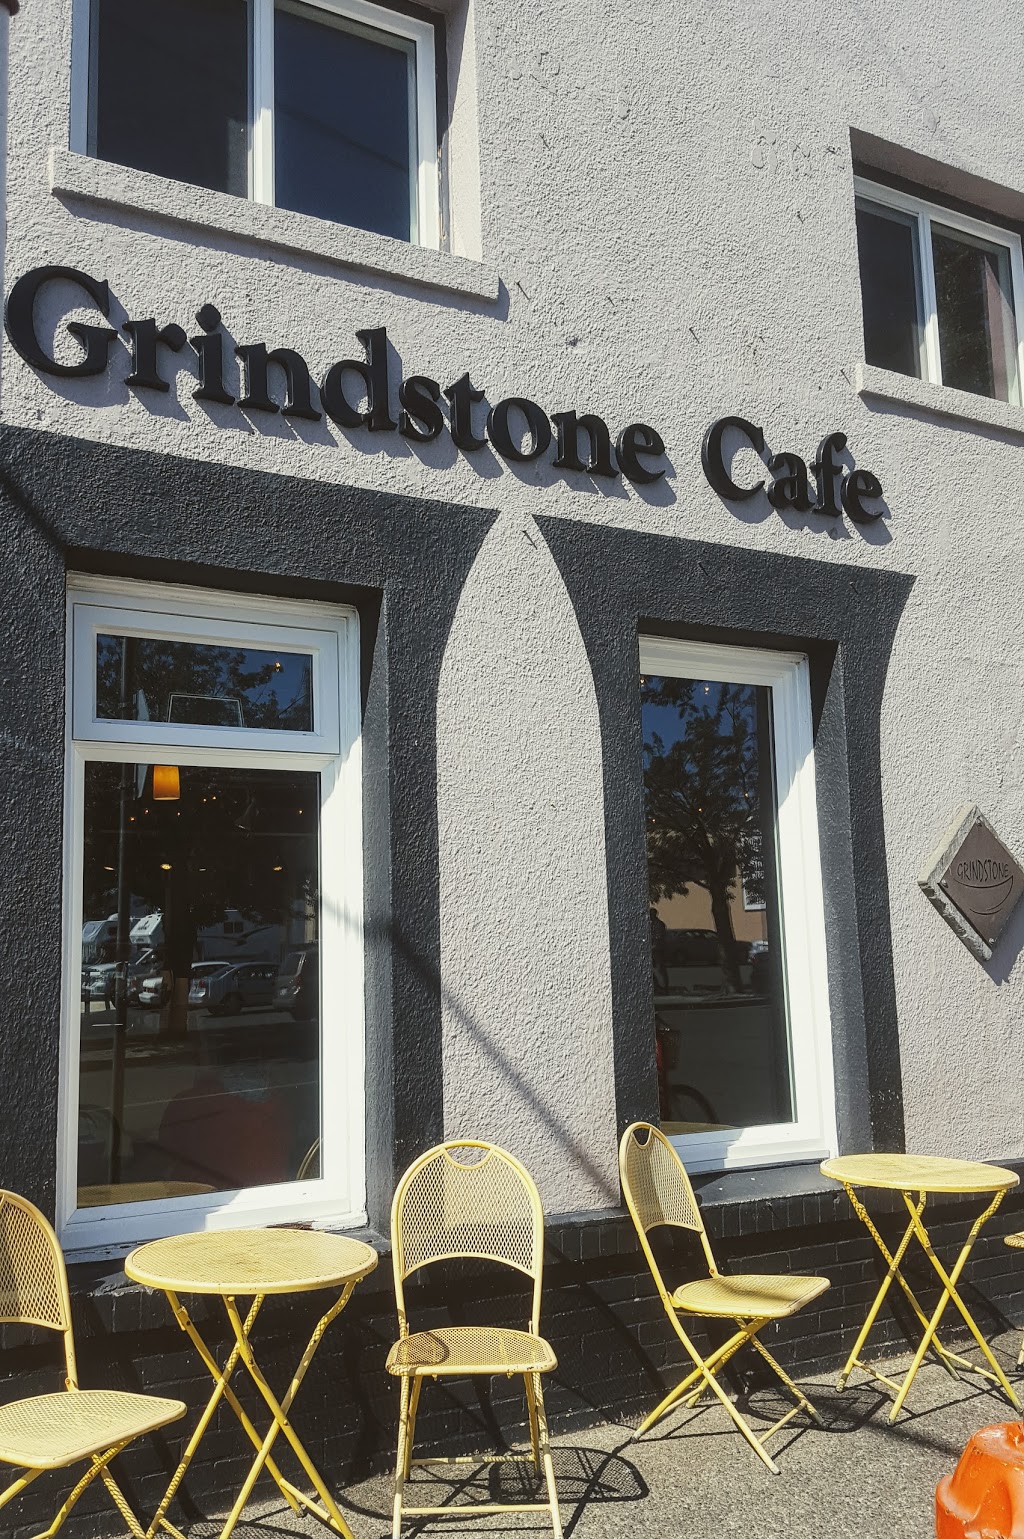 Grindstone Cafe | cafe | 504 Herald St, Victoria, BC V8W 1S6, Canada | 2504805222 OR +1 250-480-5222